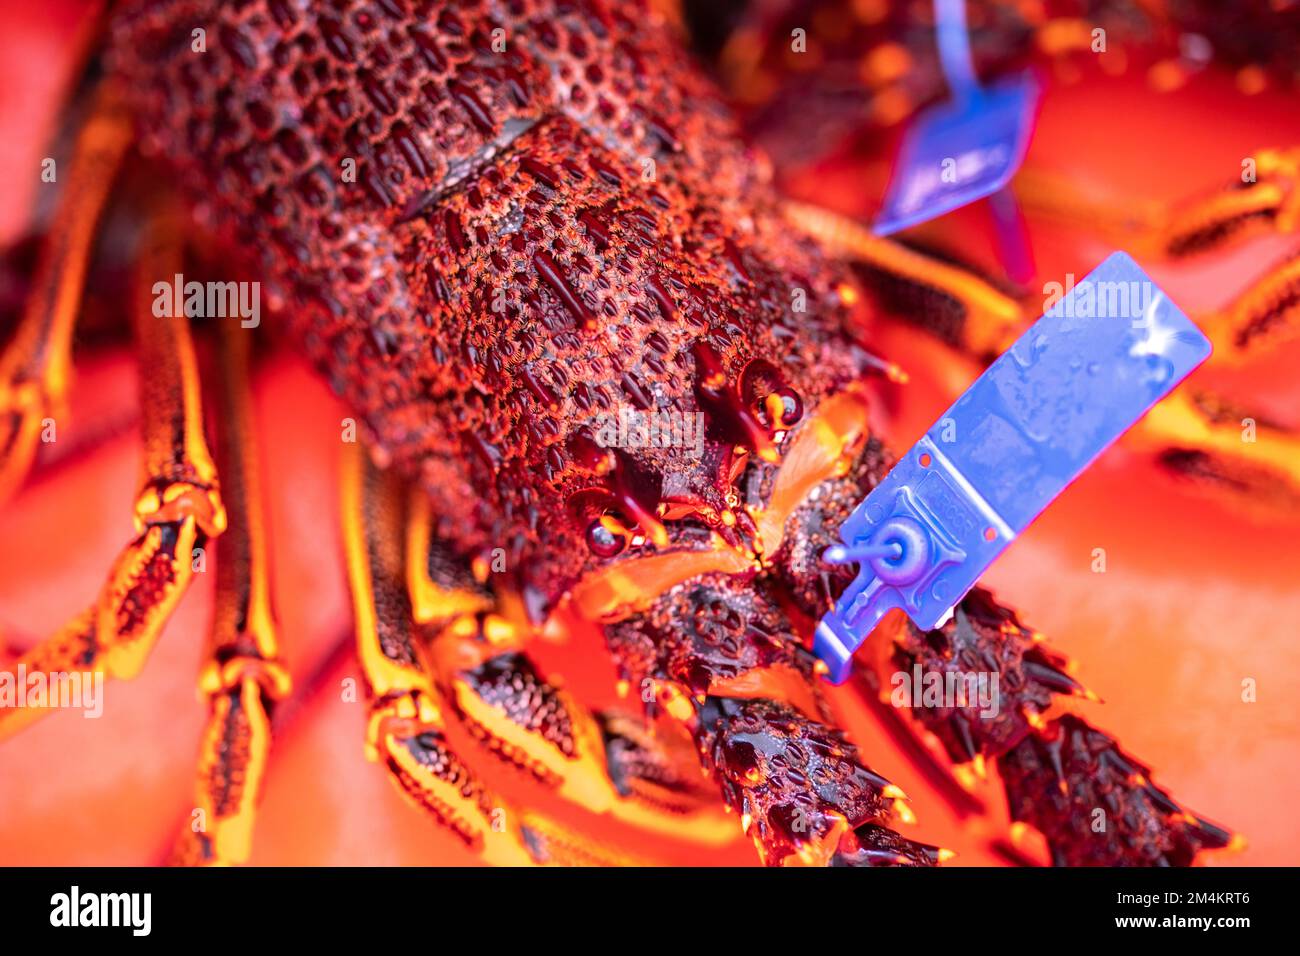 Catching live Lobster in America. Fishing crayfish in Tasmania Australia. ready for chinese new year in china Stock Photo